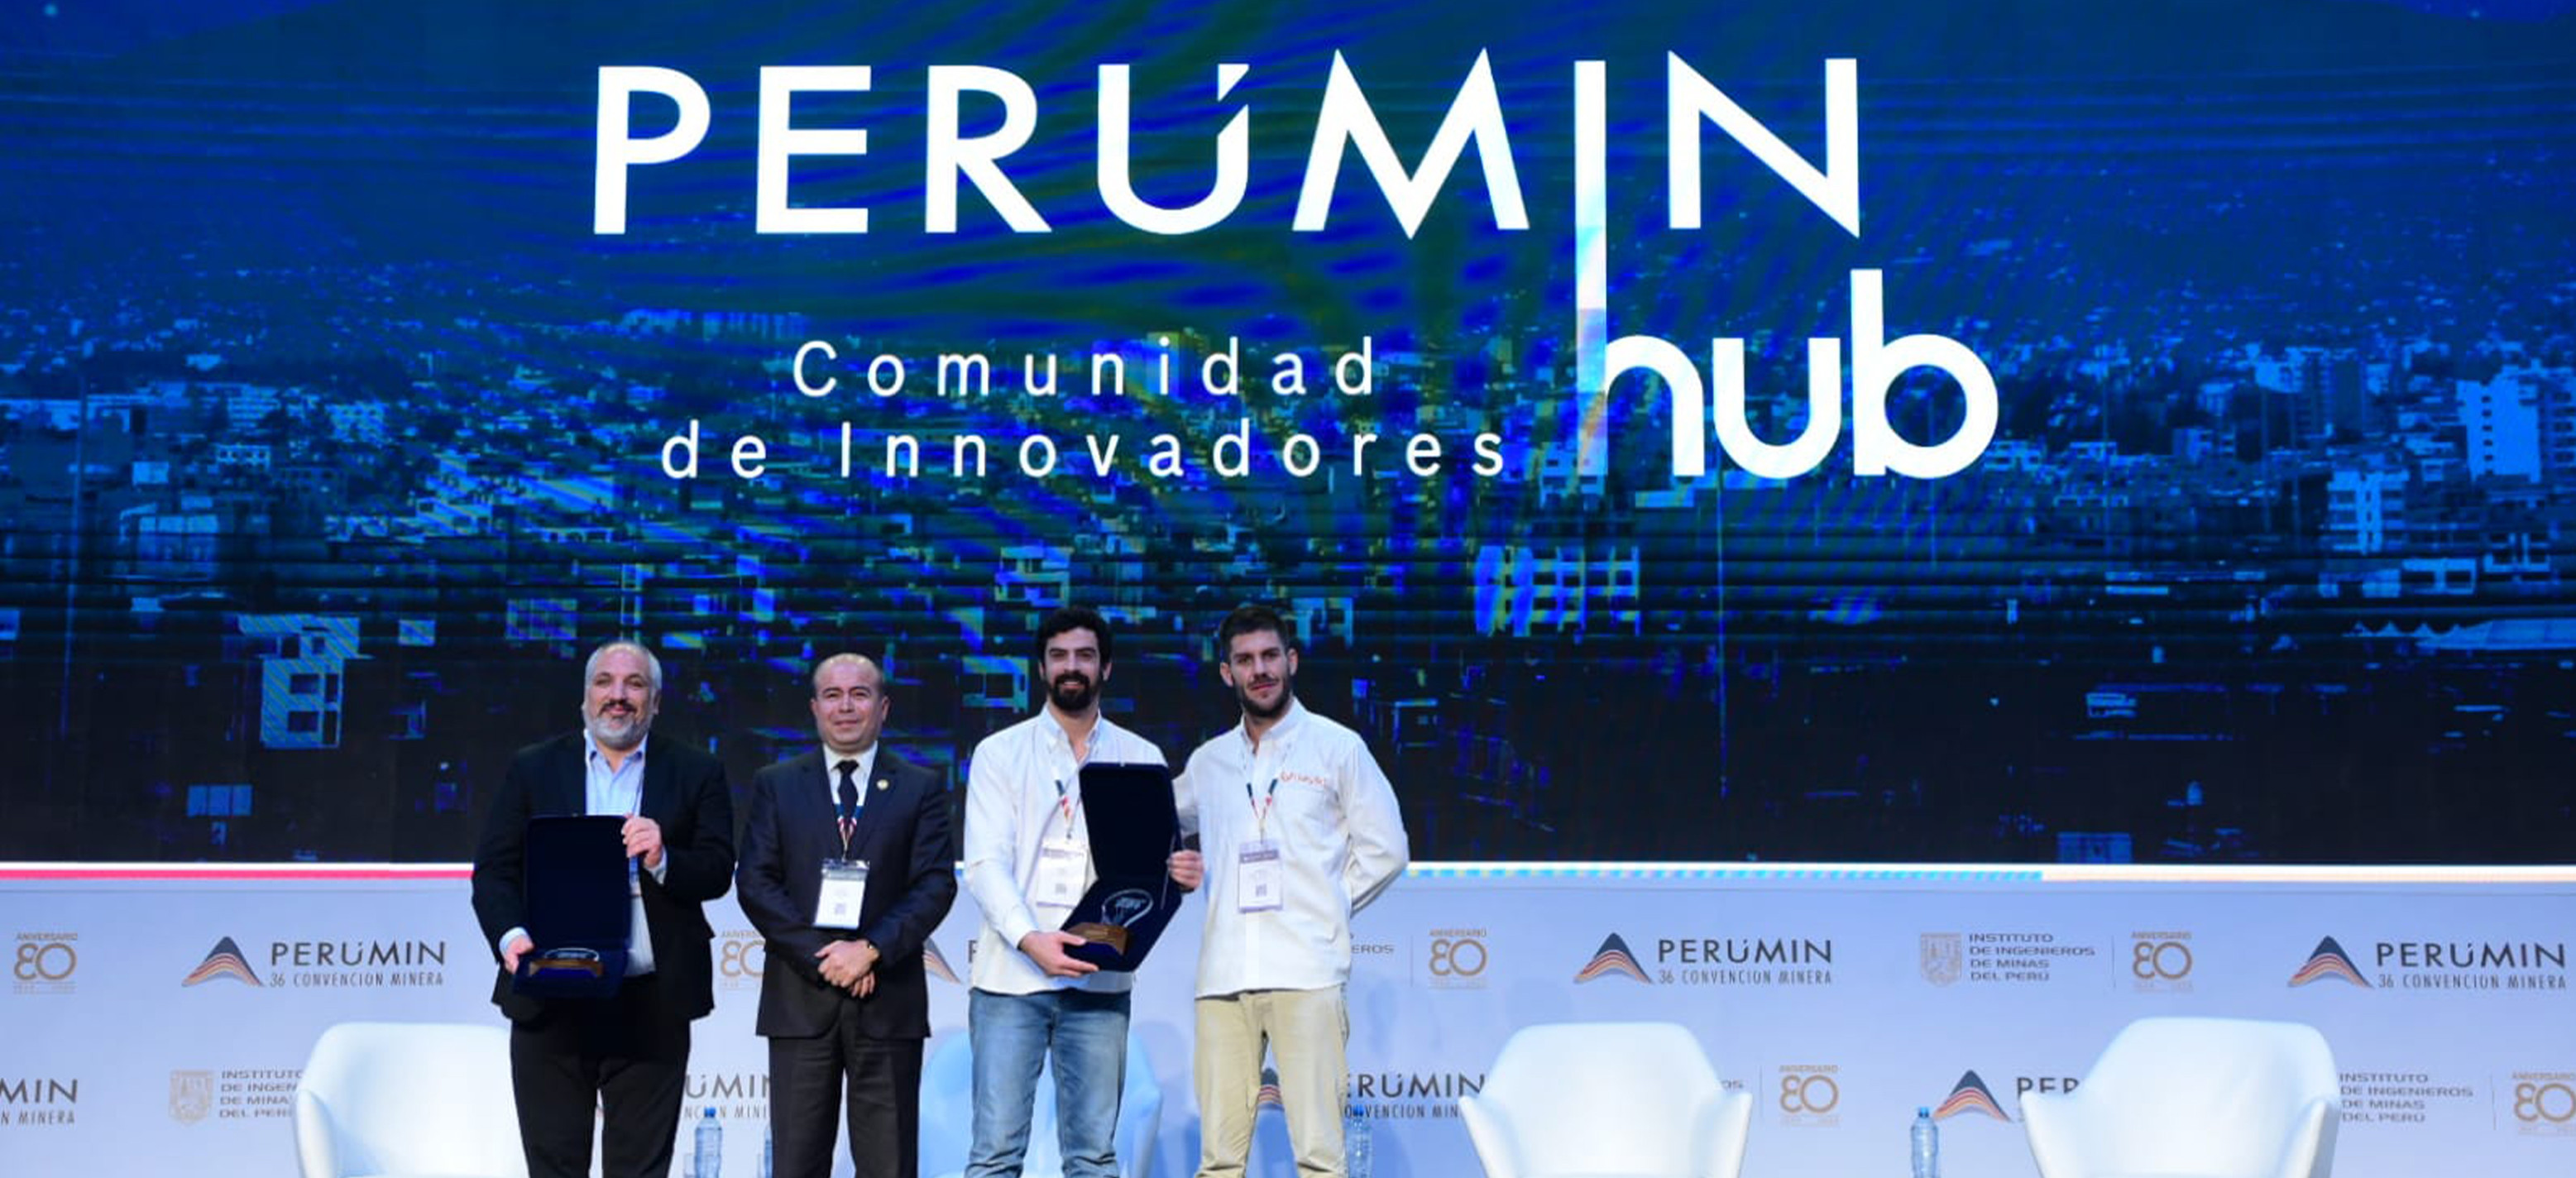 NEWS, INTERVIEWS AND EVERYTHING RELATED TO PERUMIN IN THE MEDIA